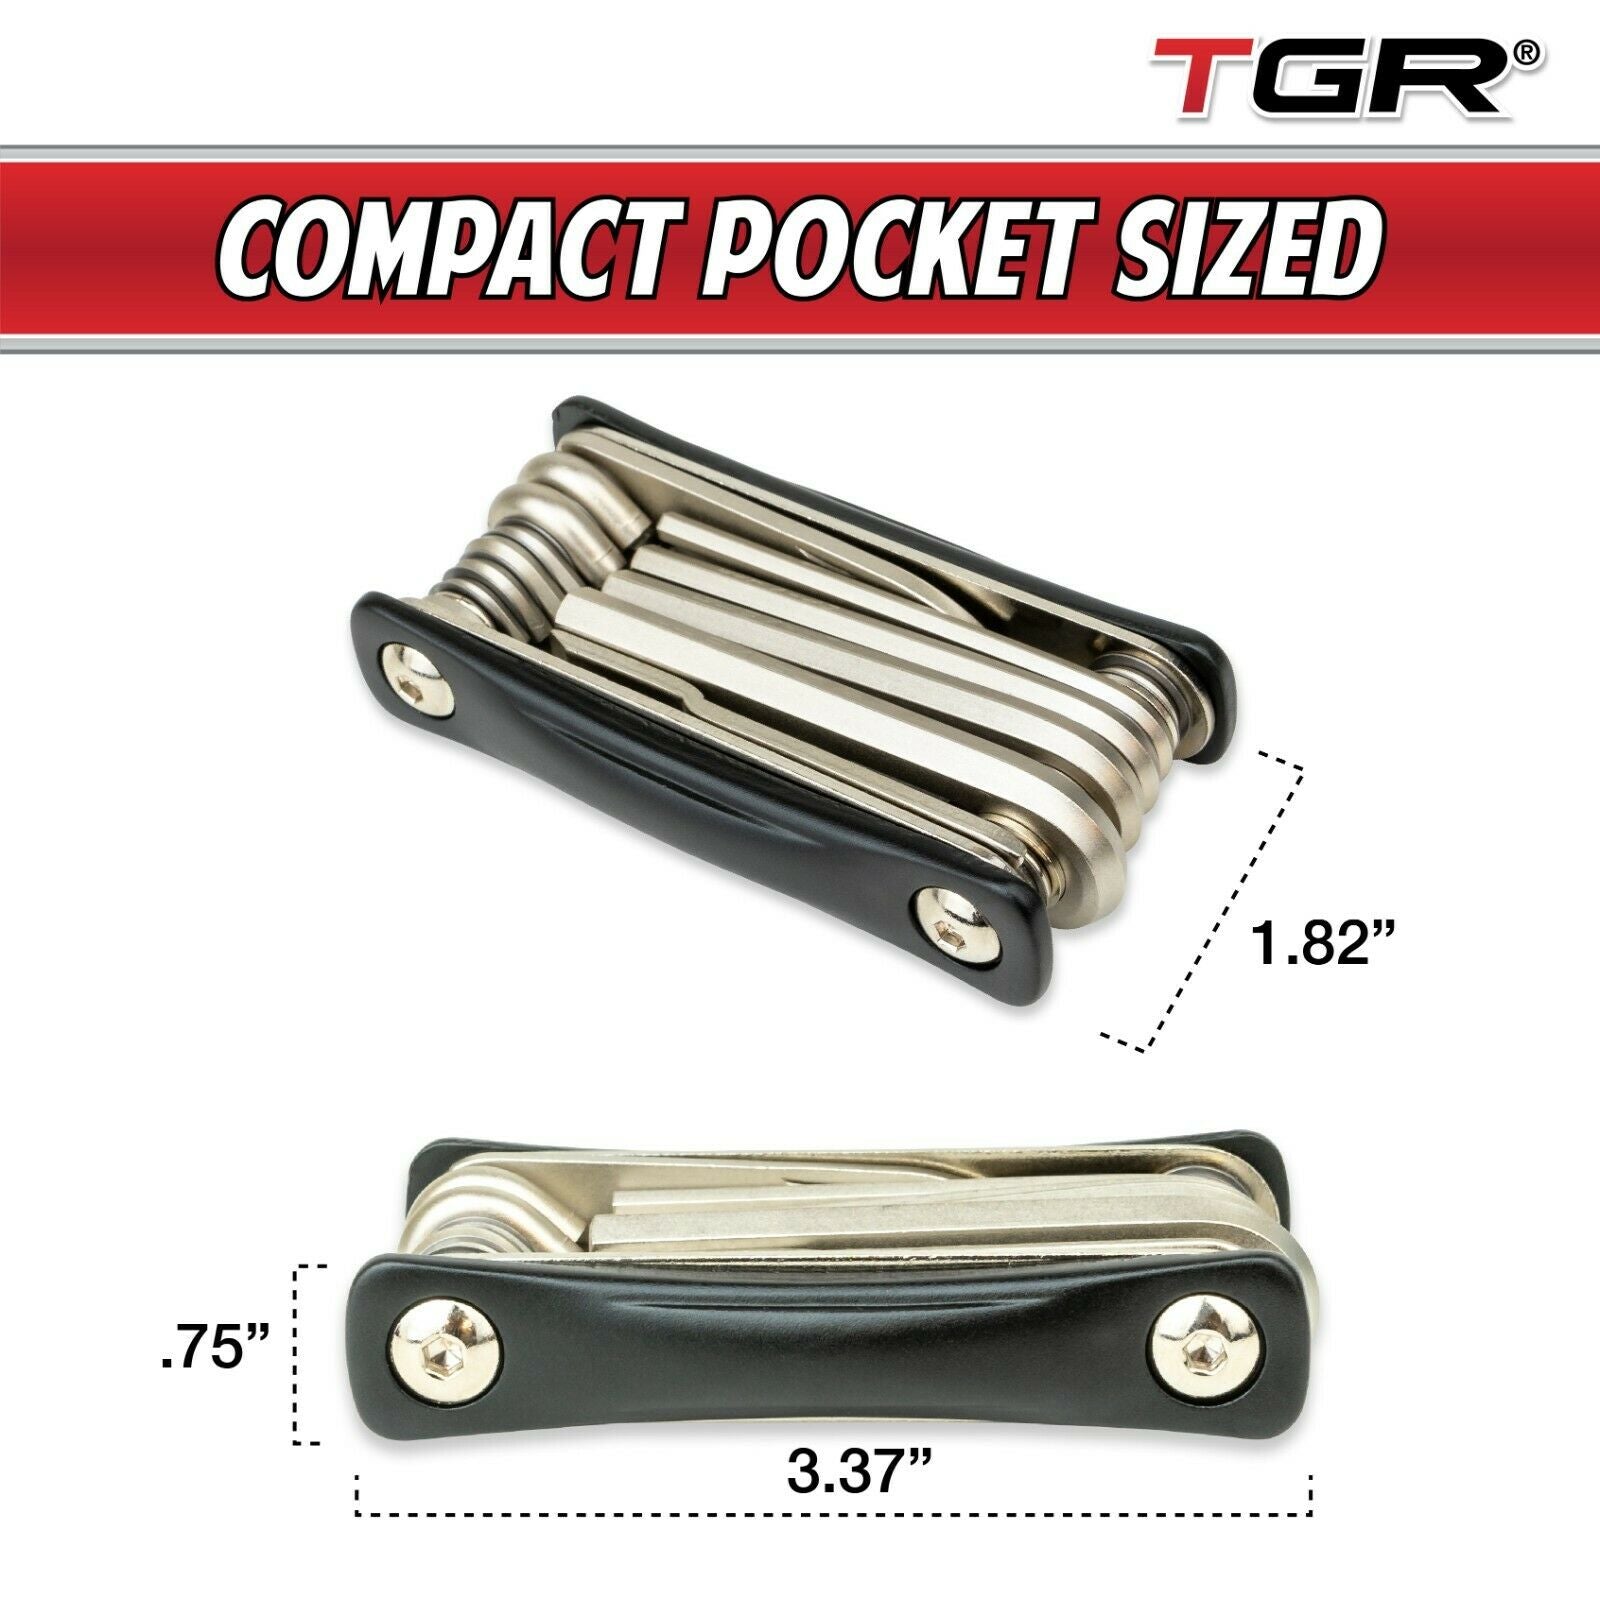 TGR 19 in 1 Folding Multi-Function Bicycle Tool - Heavy Duty, Compact Pocket Sized, Lightweight - for Road and Mountain Bikes - Tool Guy Republic